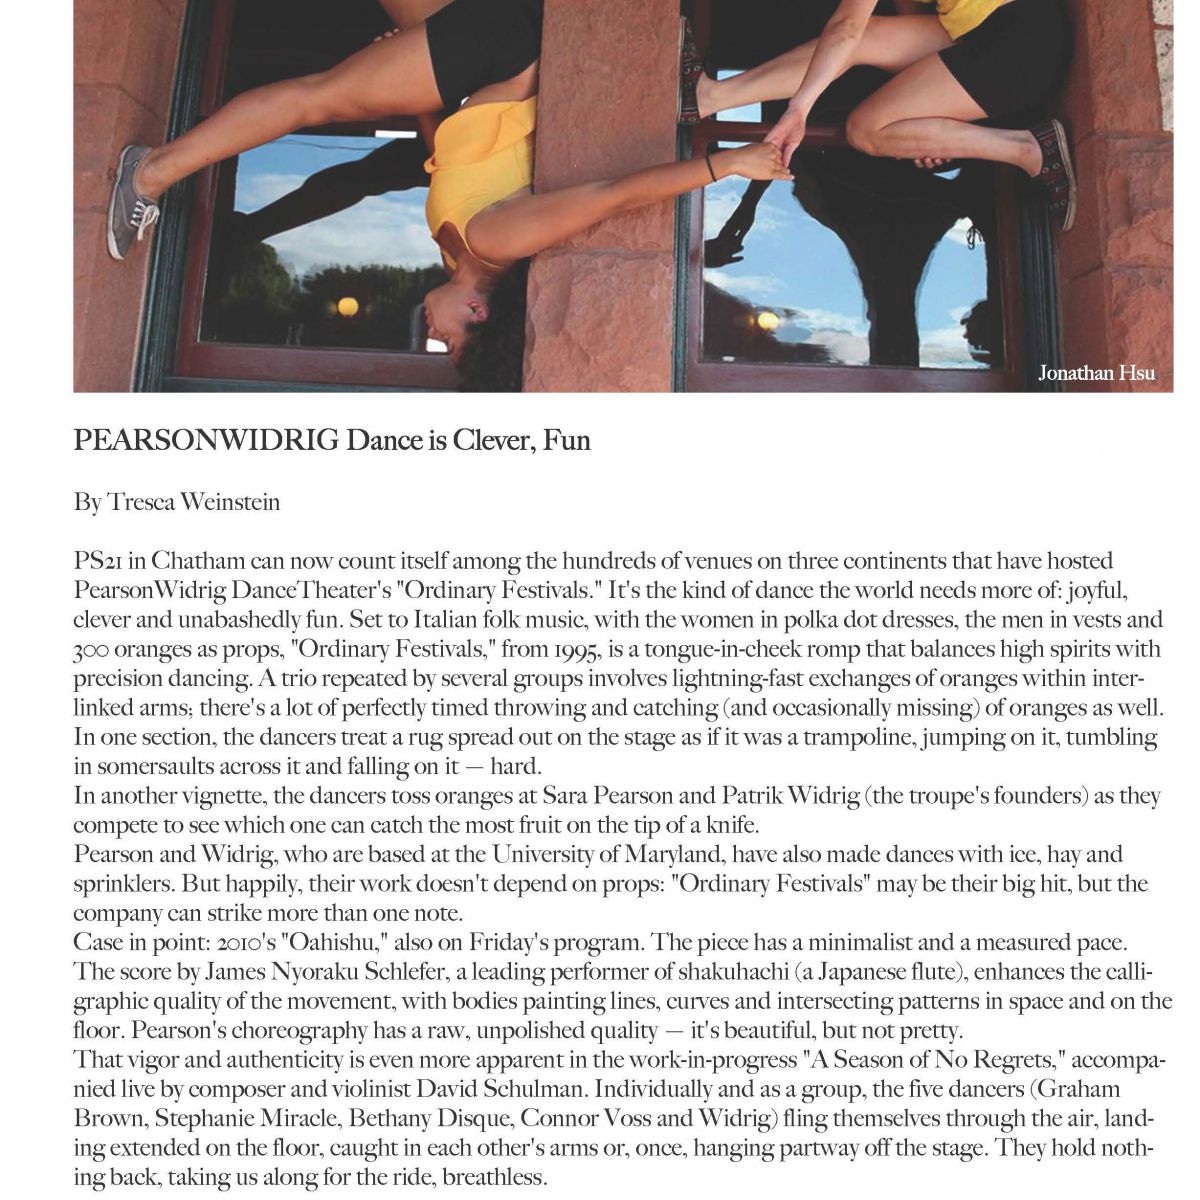 TDPS dance faculty, students and alumni create site performance in Chatham